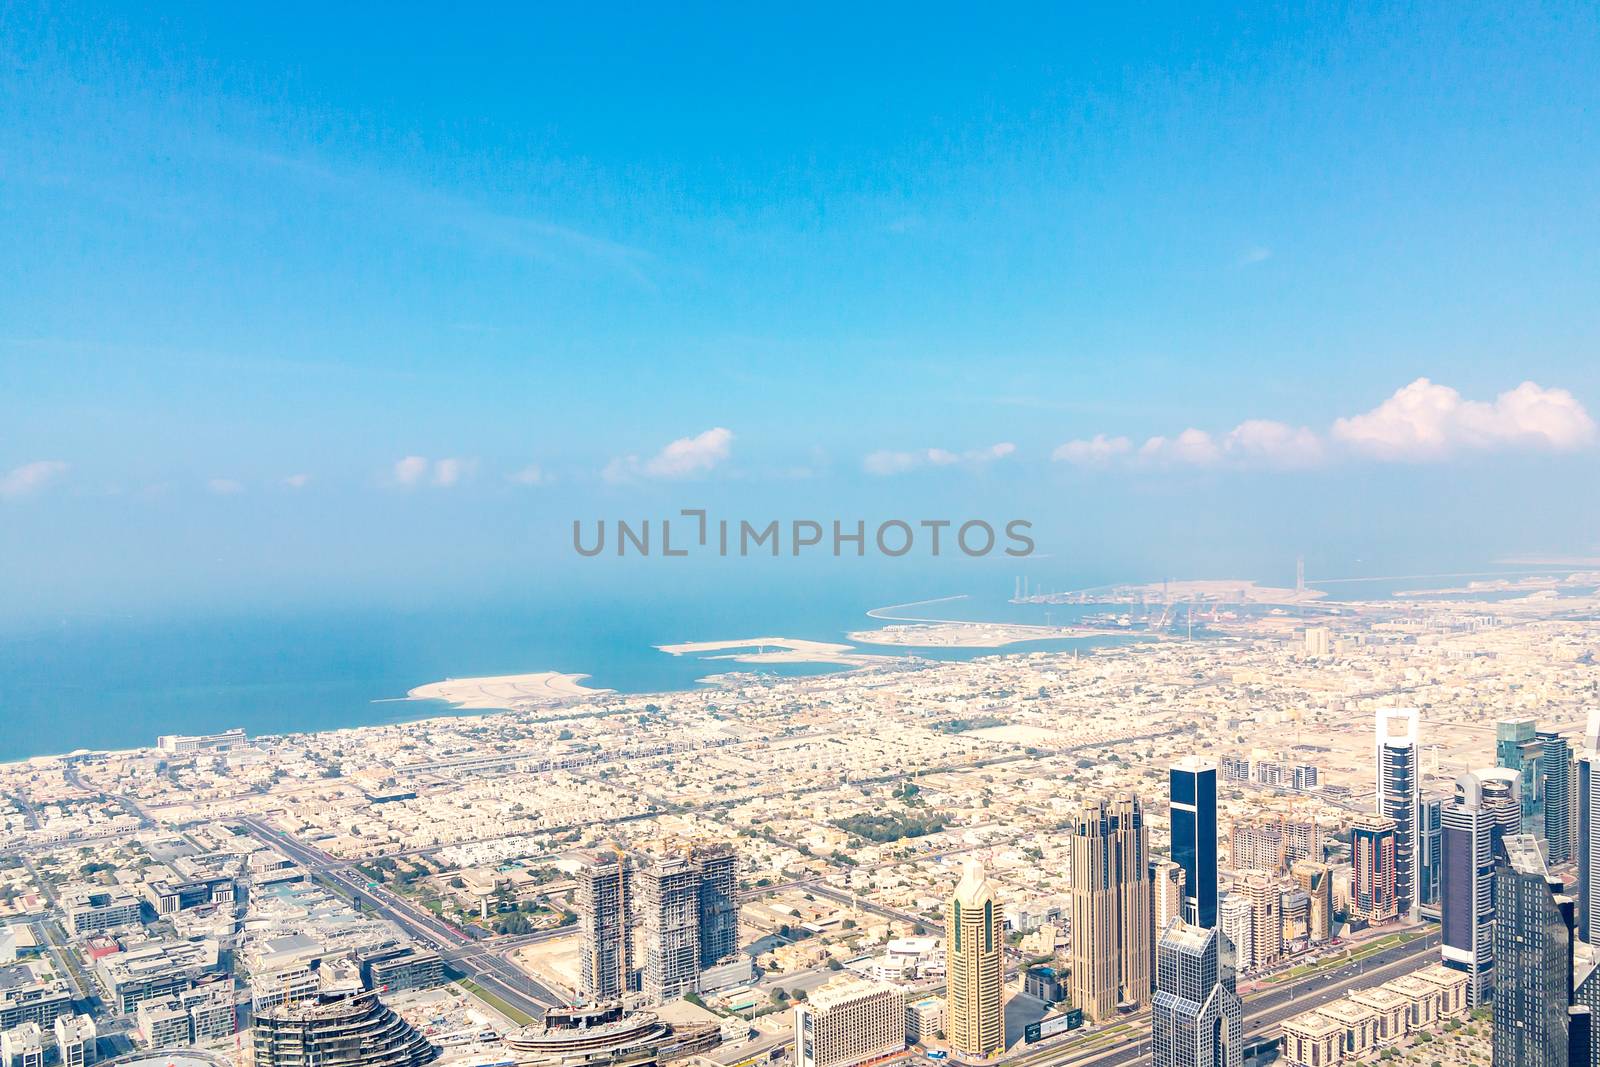 Fantastic view of Dubai from the tallest building in the world - Burj Khalifa Towers.